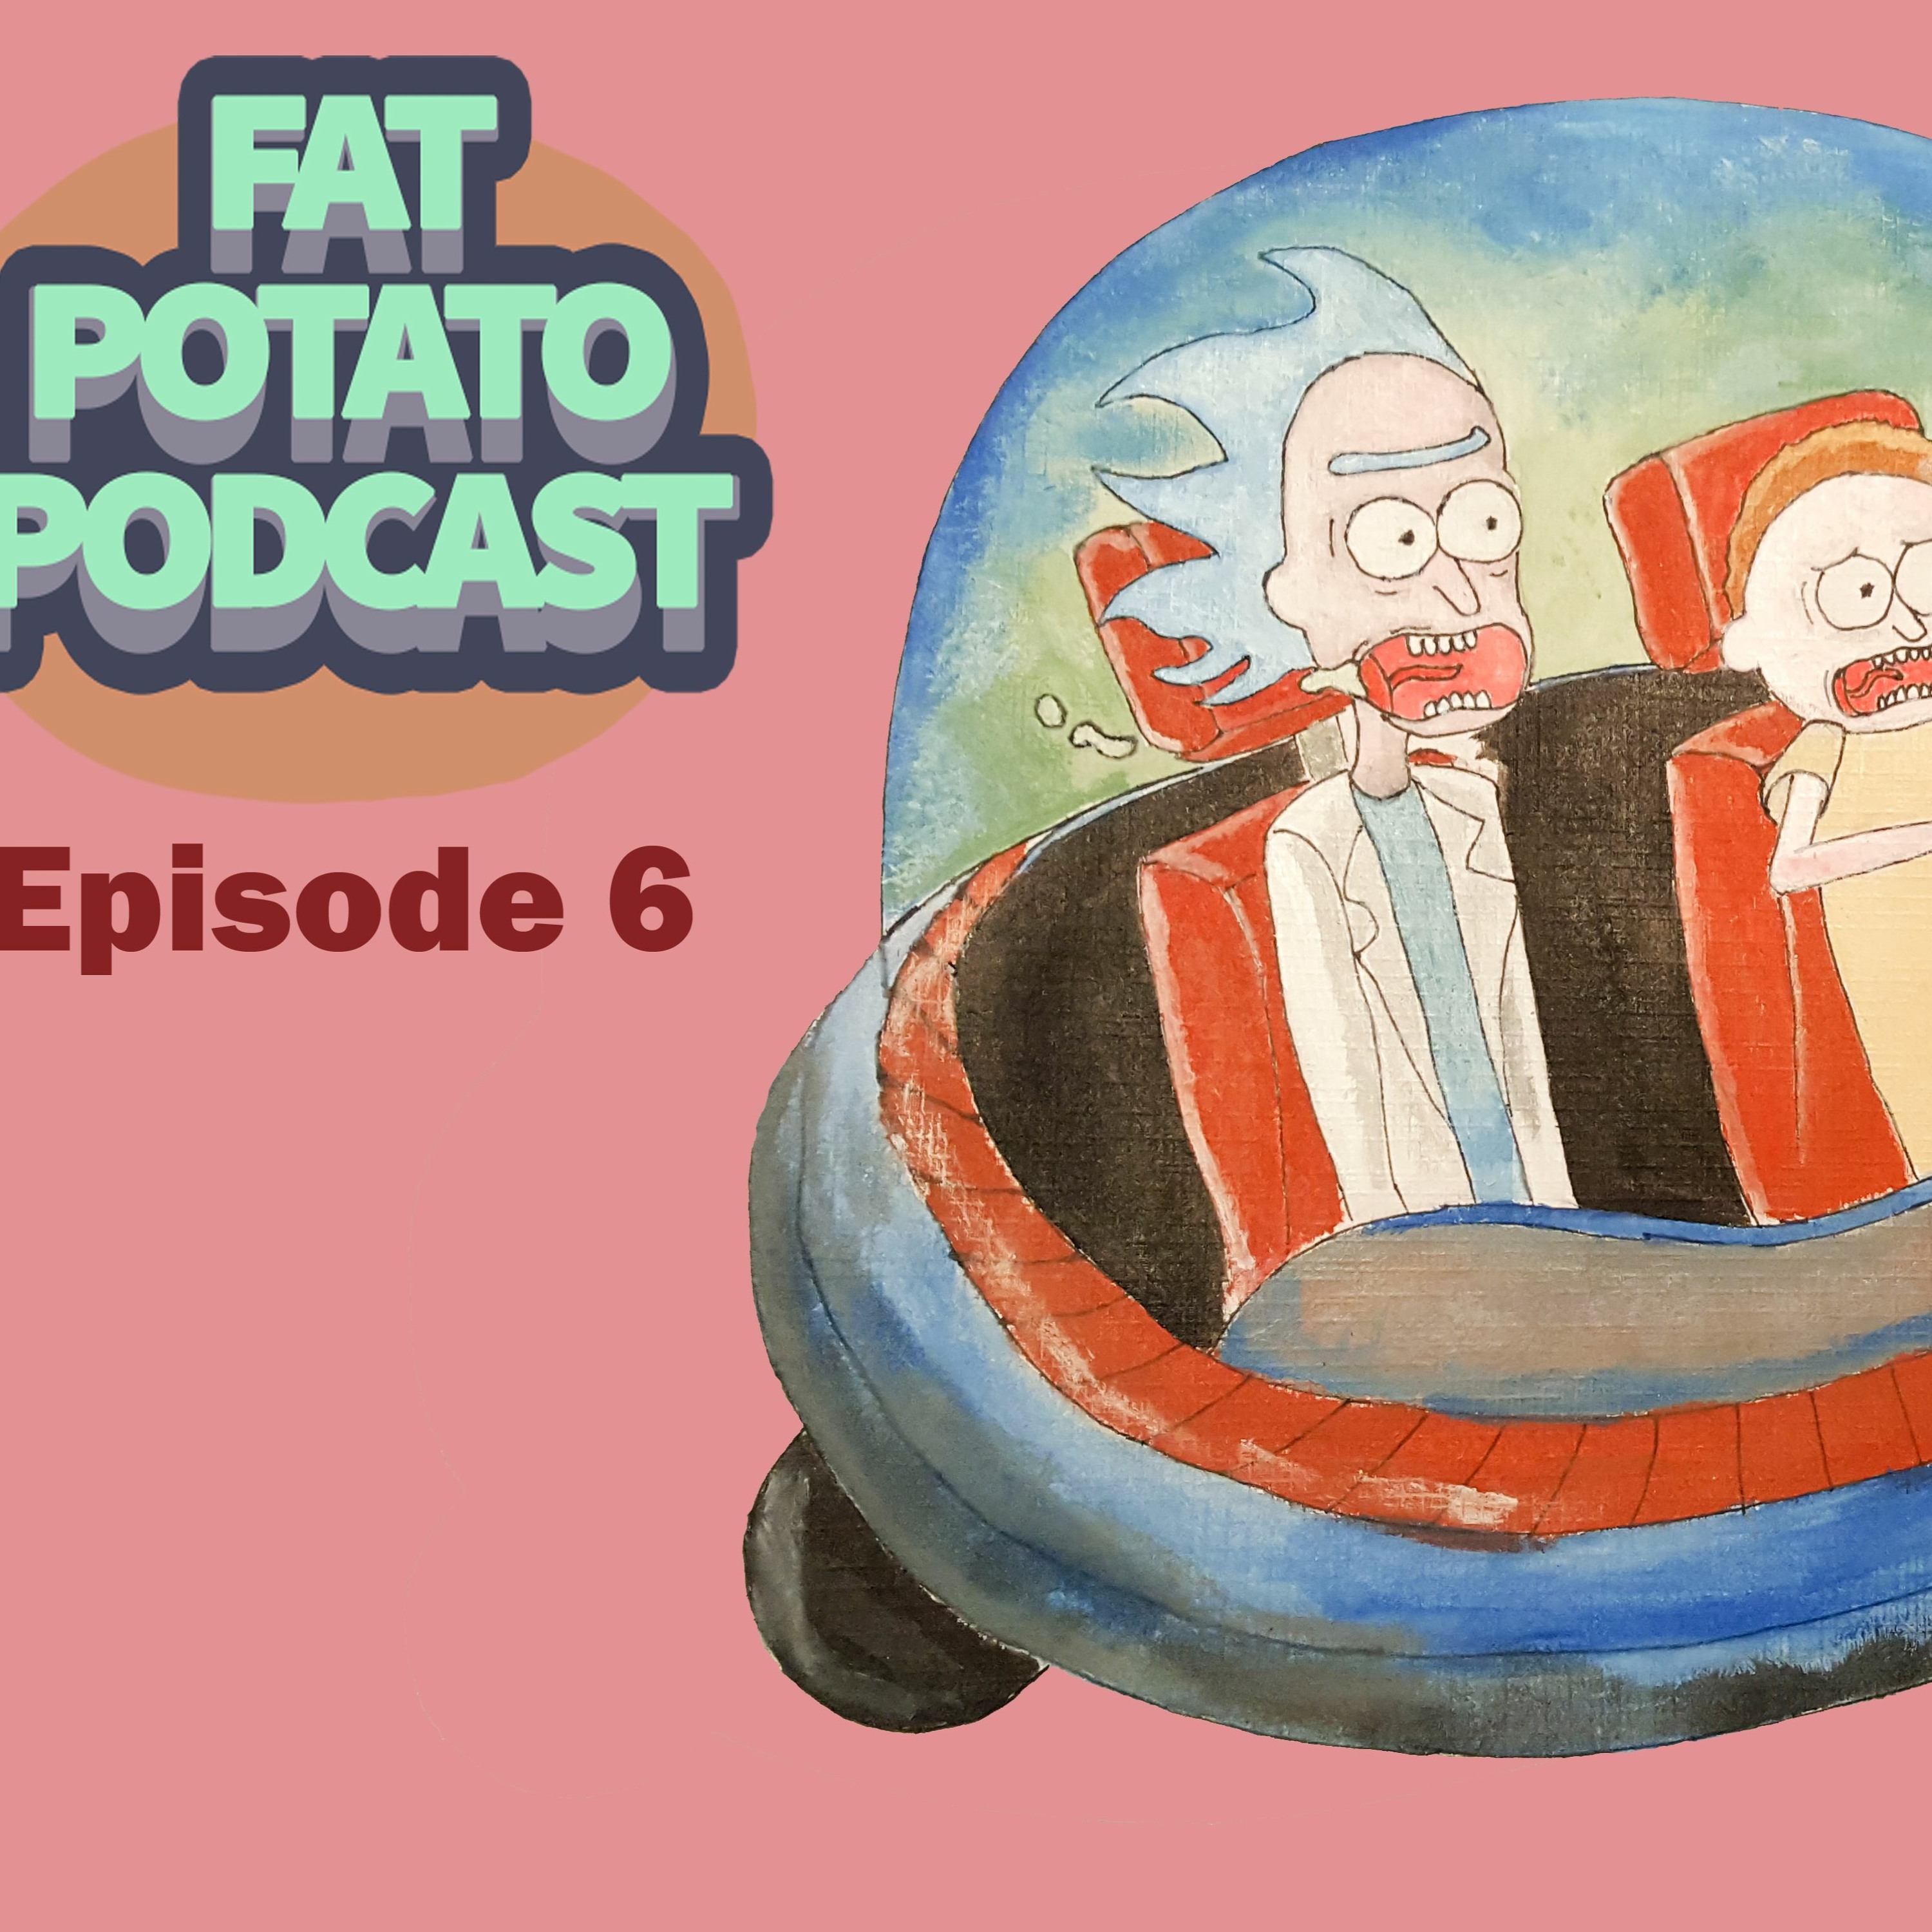 Fat Potato Podcast • FPP EP6 - Rick And Morty ~ Impressions, Mr  Poopybutthole And Pickle Rick • Podcast Addict